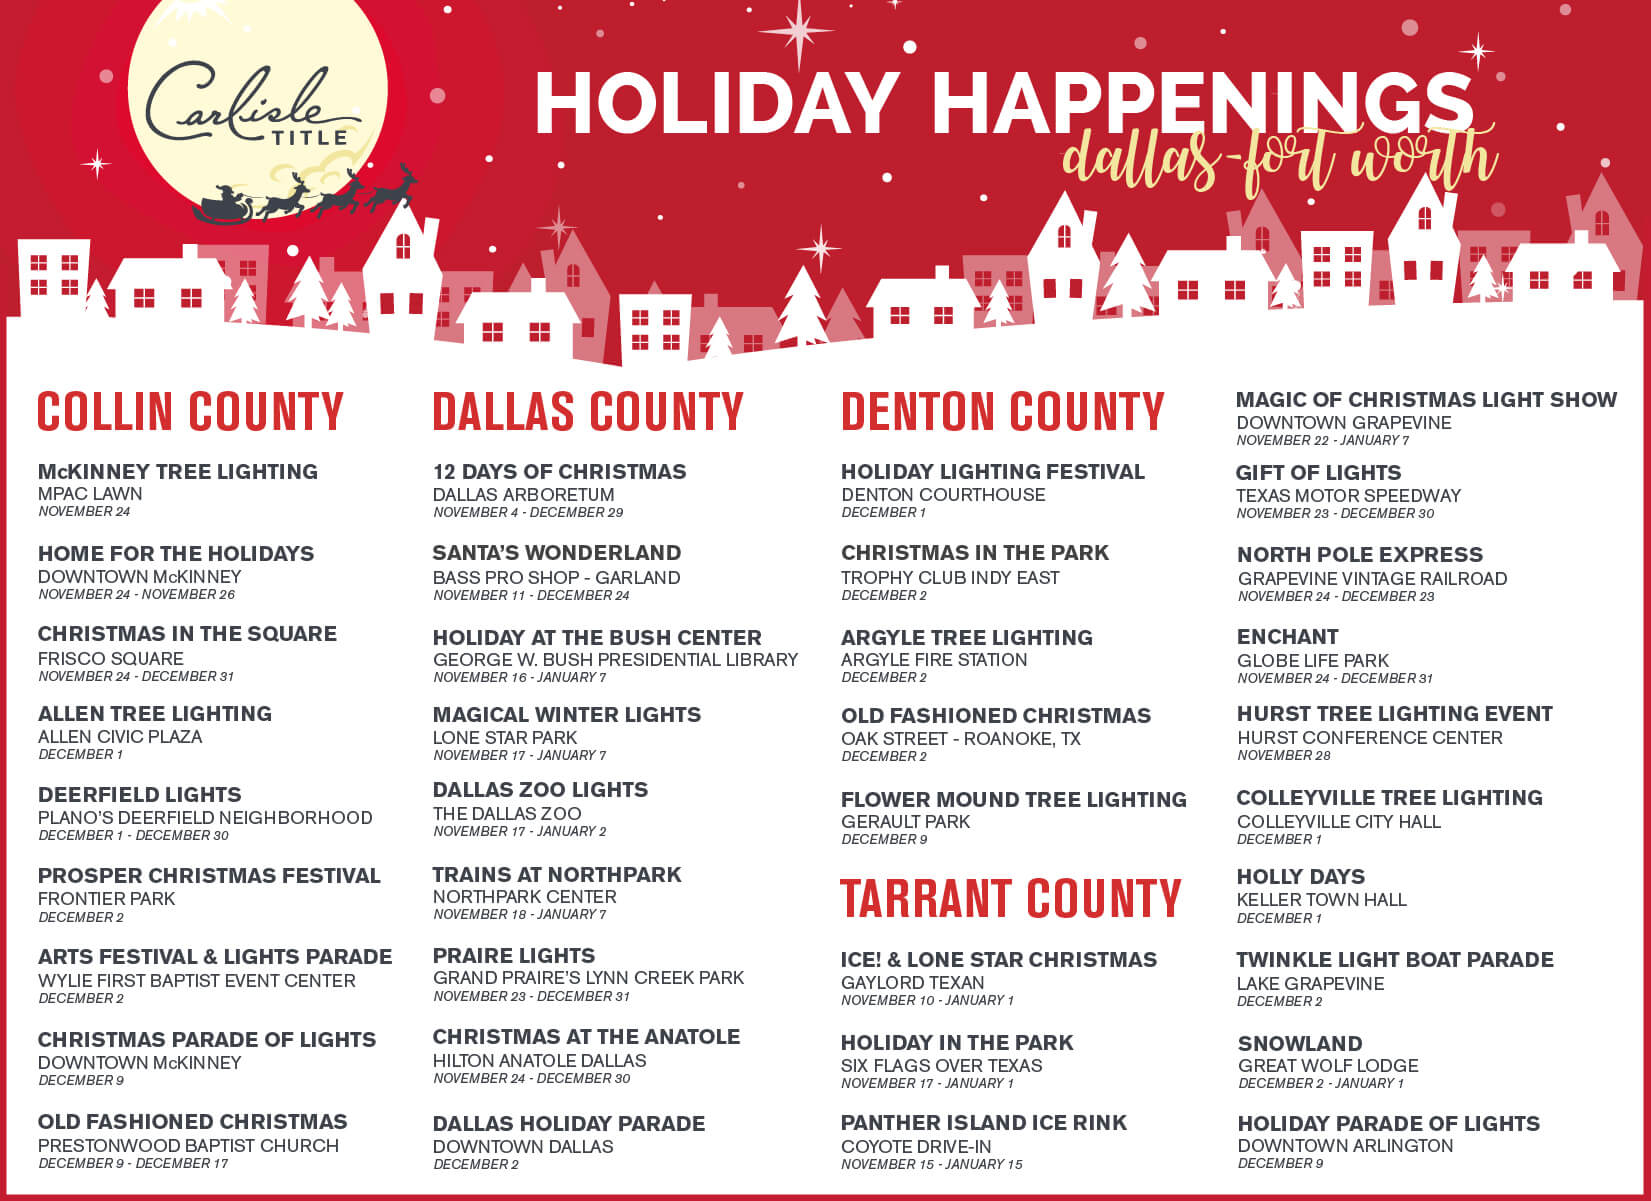 Holiday Happenings in Dallas Fort Worth Carlisle Title